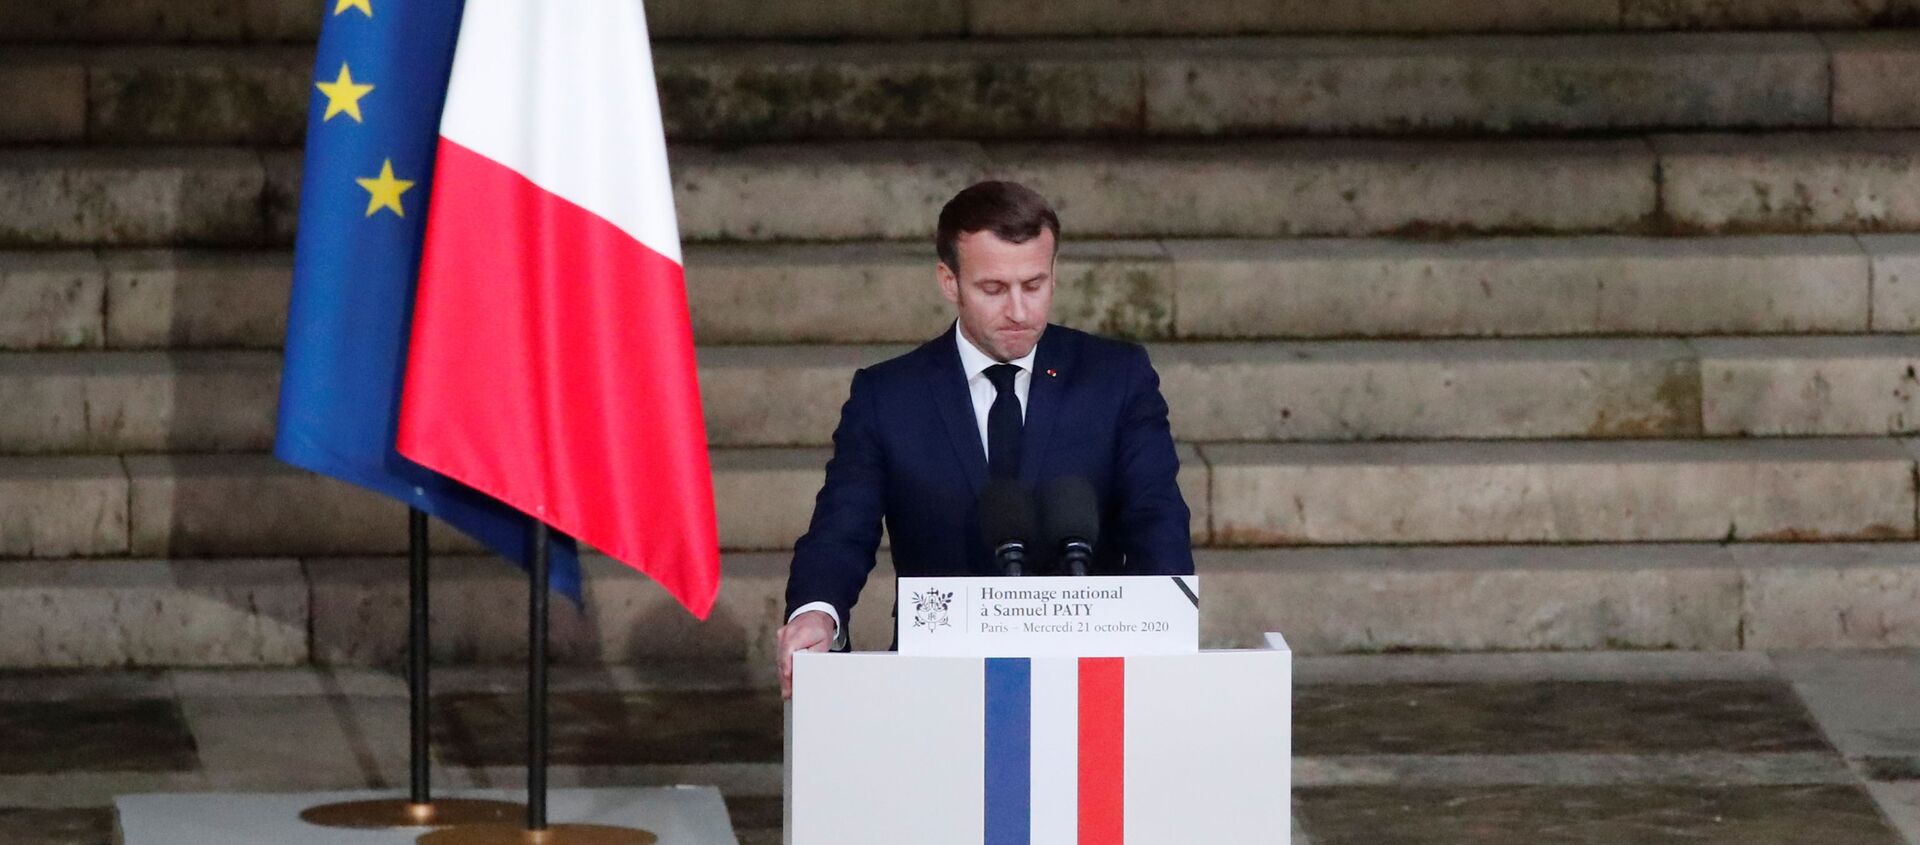 French President Emmanuel Macron delivers his speech in front of the coffin of slain teacher Samuel Paty during a national memorial event, in Paris, France October 21, 2020.  - Sputnik International, 1920, 29.10.2020